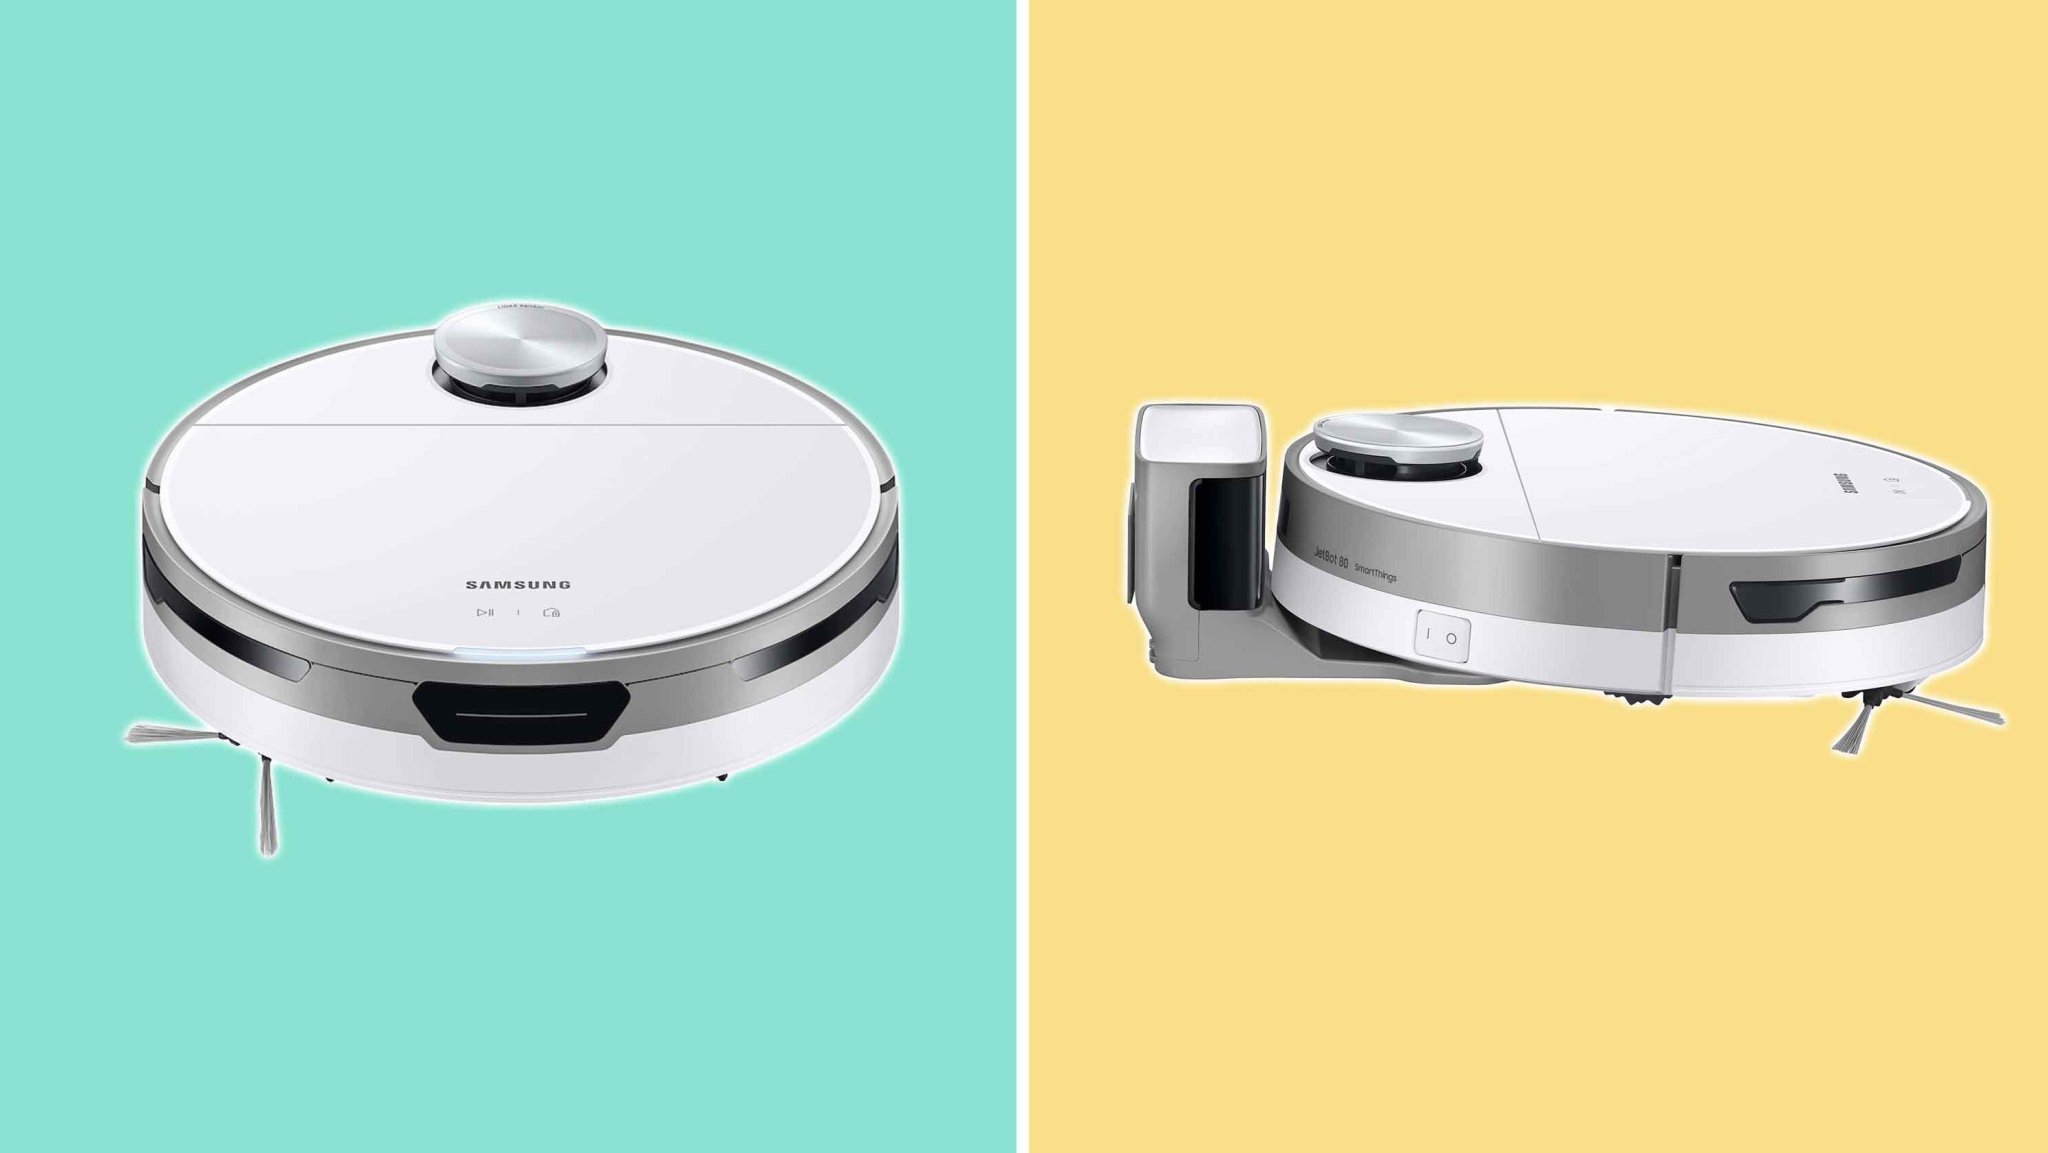 Save $350 on a smart Samsung robot vacuum that'll help you clean without lifting a finger